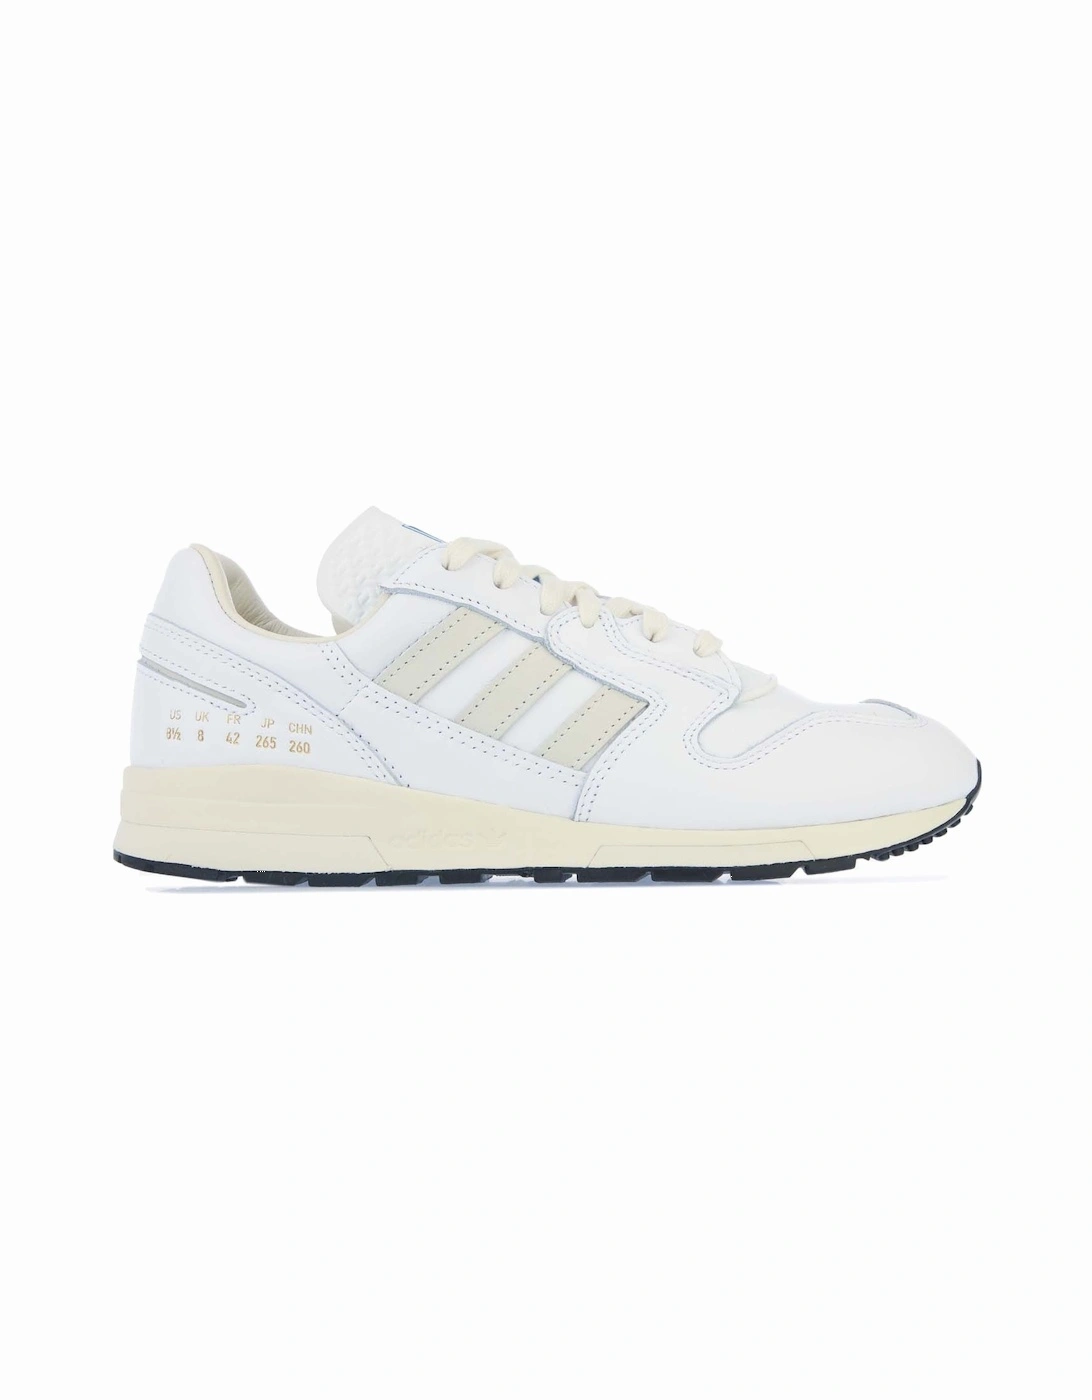 Adidas Men's Mens ZX 420 Trainers - White - Size: 5